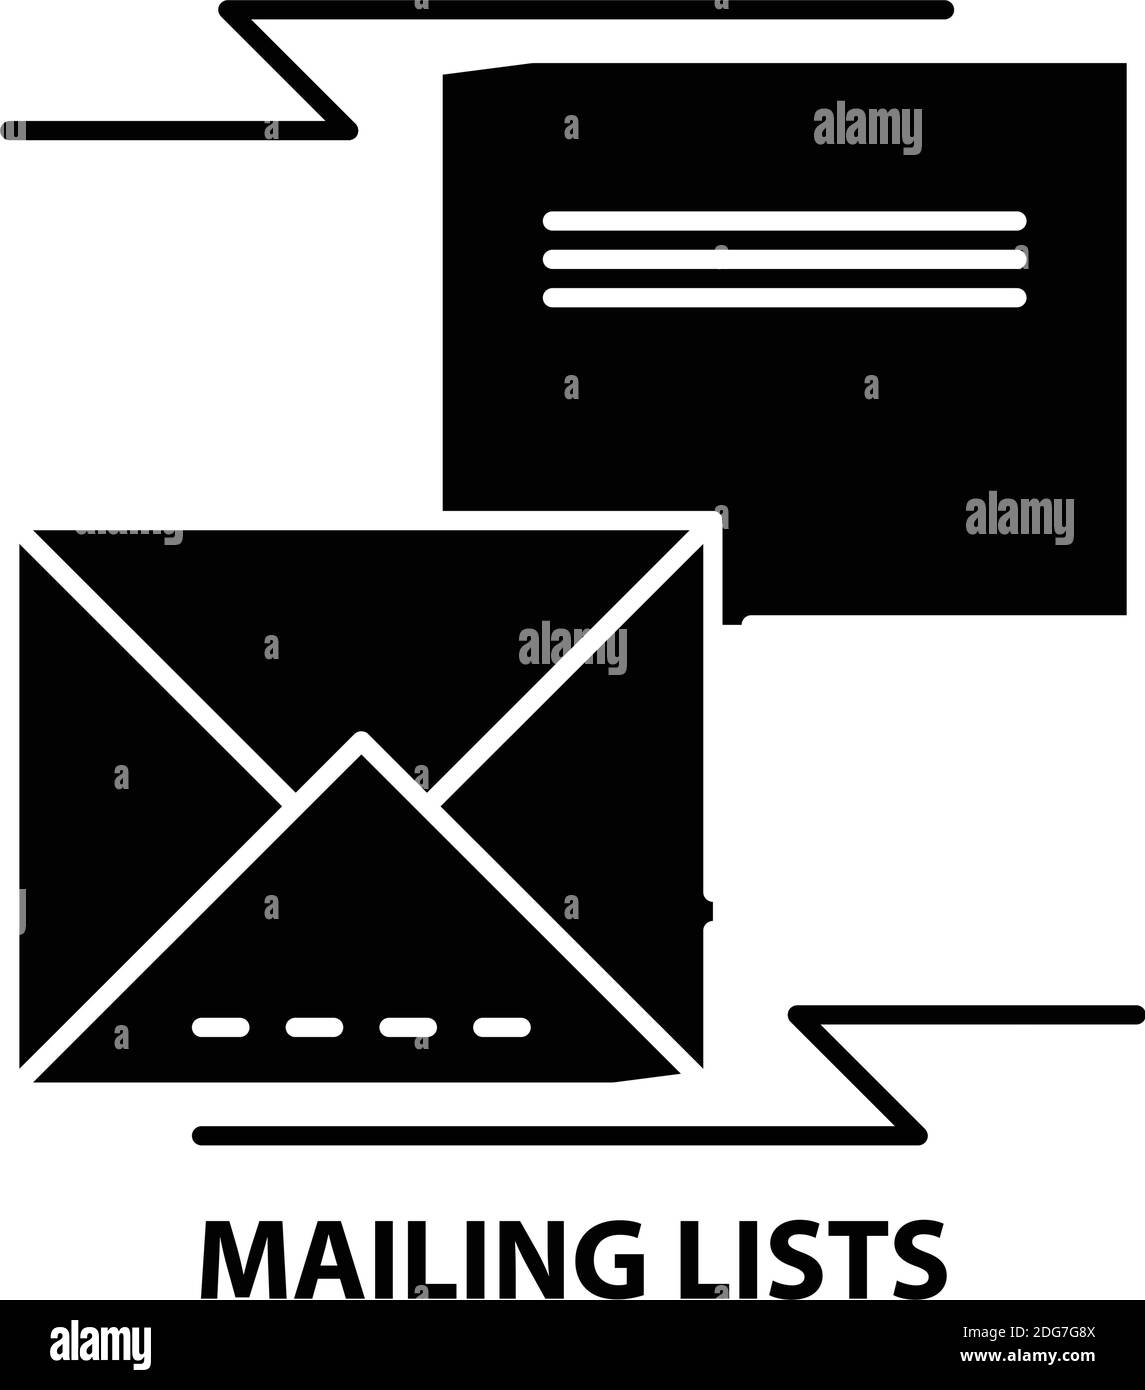 mailing lists icon, black vector sign with editable strokes, concept illustration Stock Vector